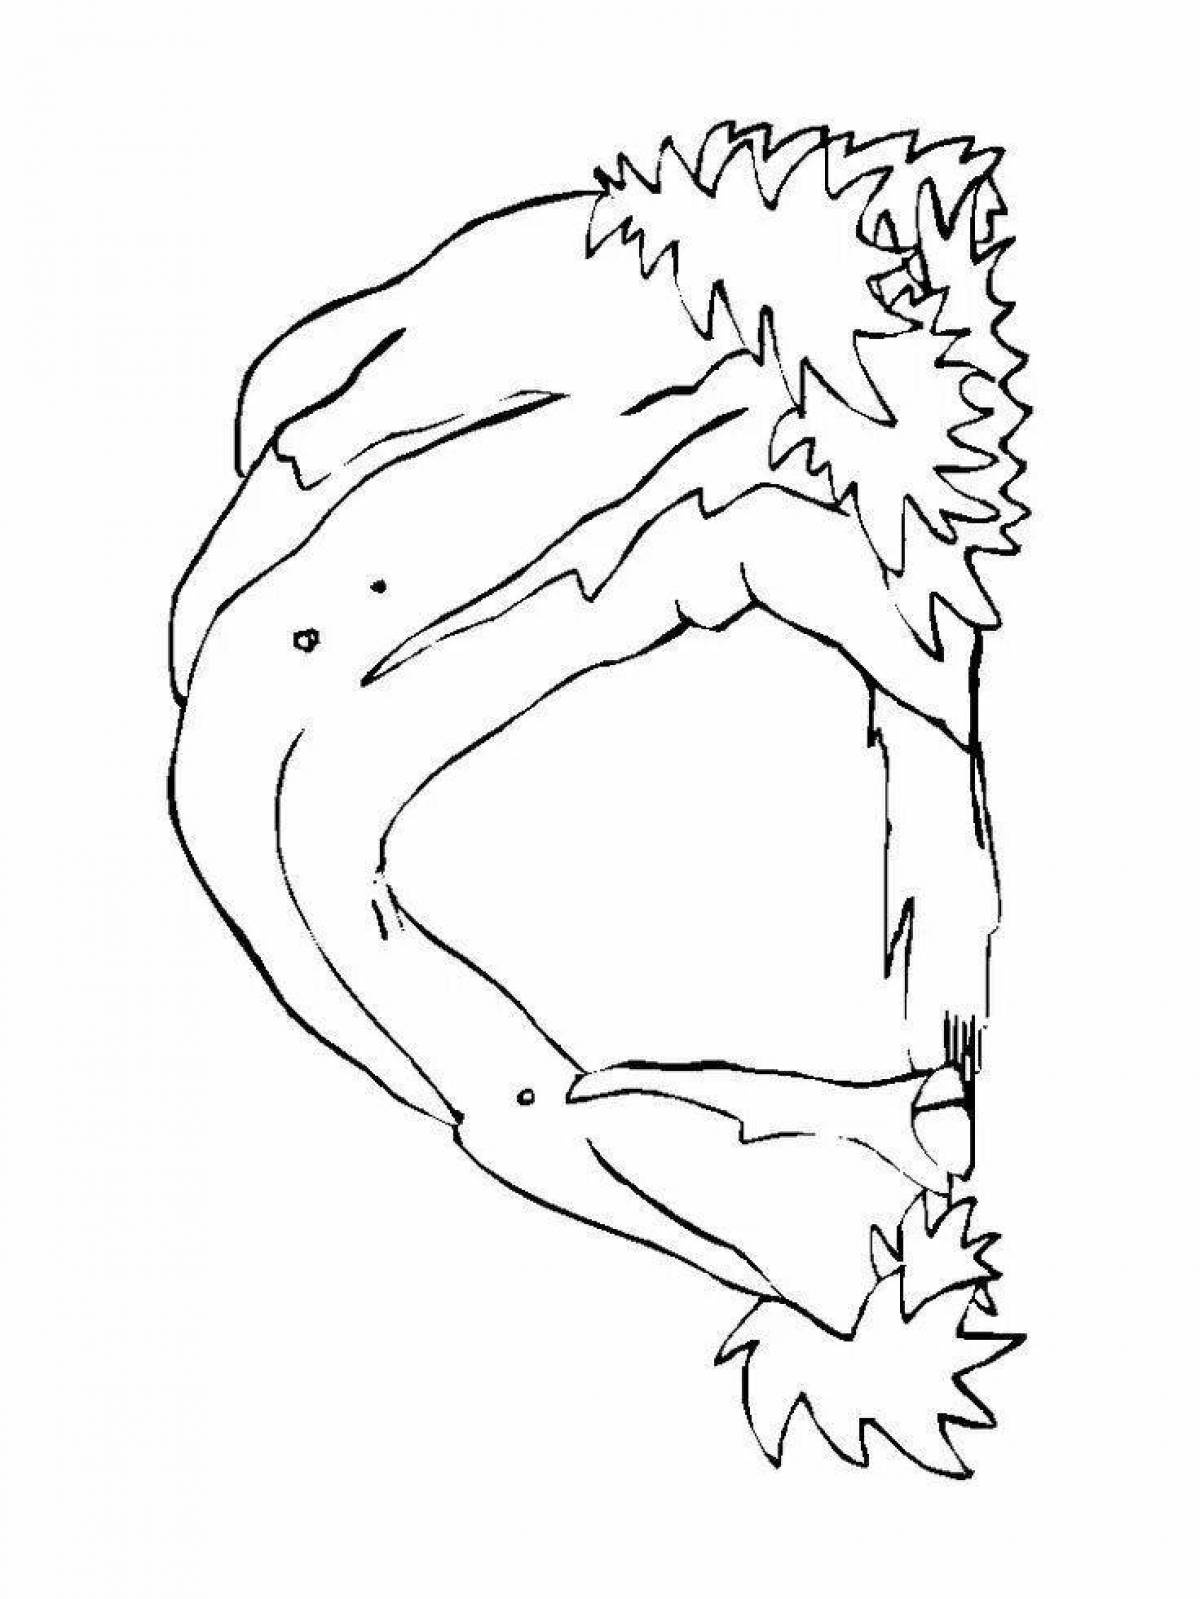 Majestic cave coloring page